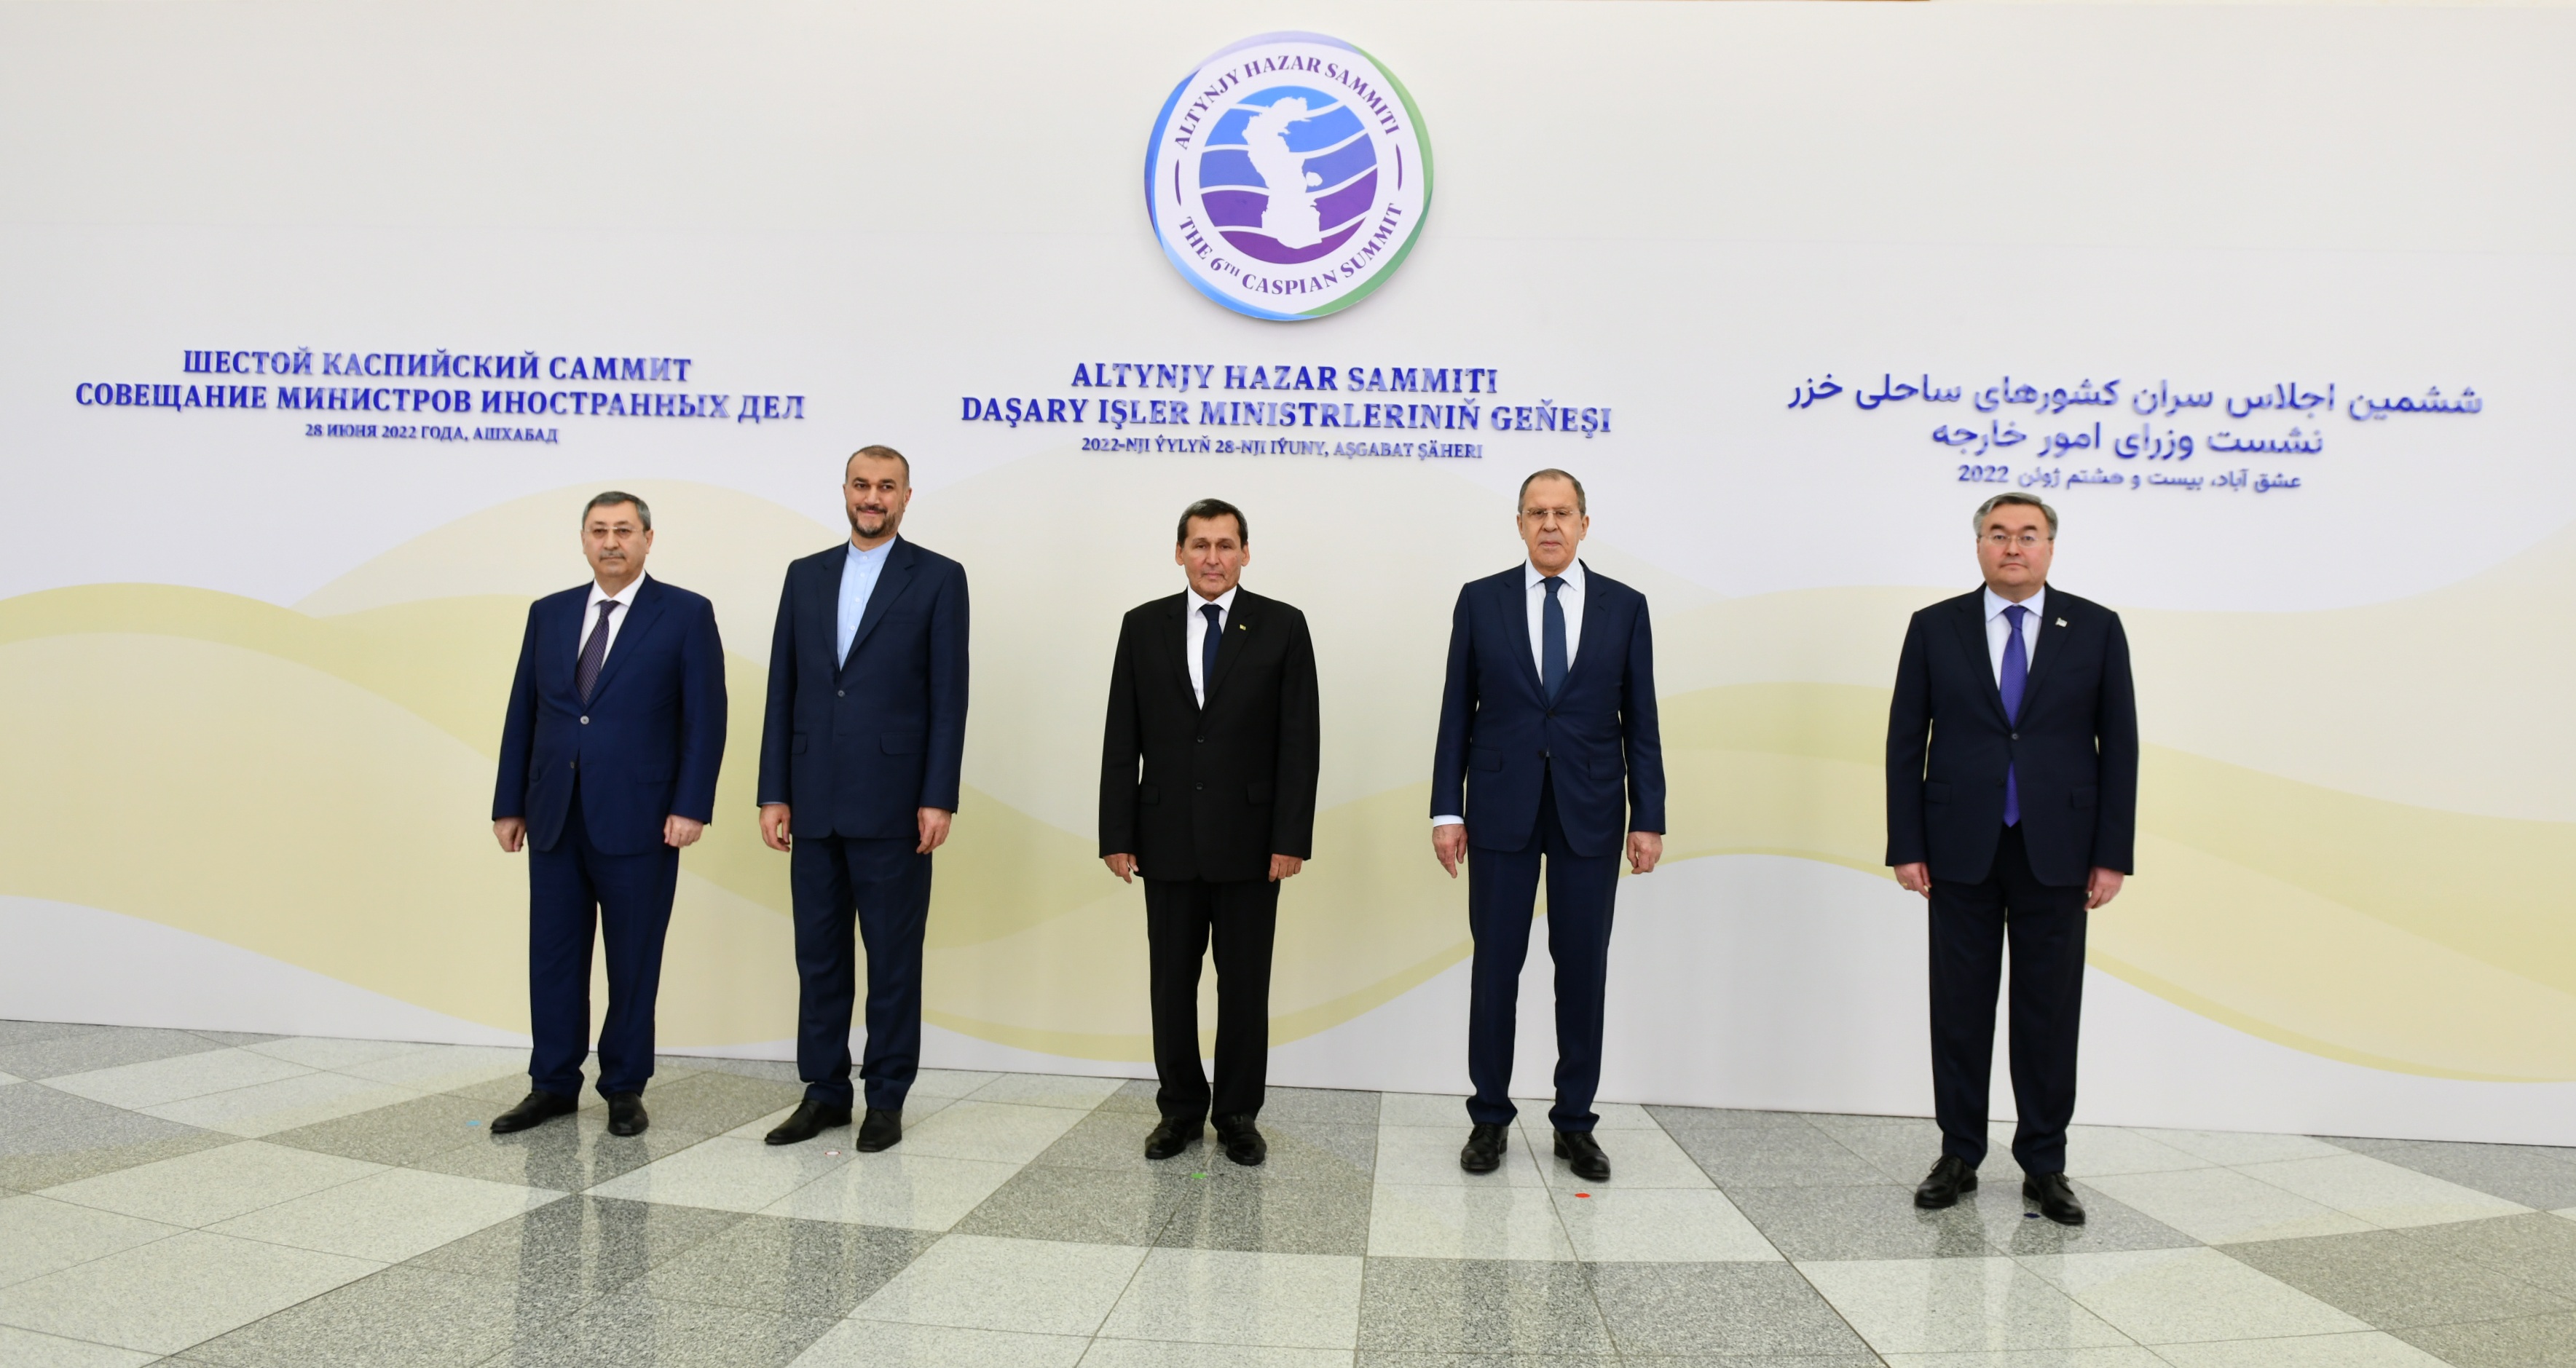 Ashgabat Hosted a Meeting of the Ministers of Foreign Affairs of the Caspian States